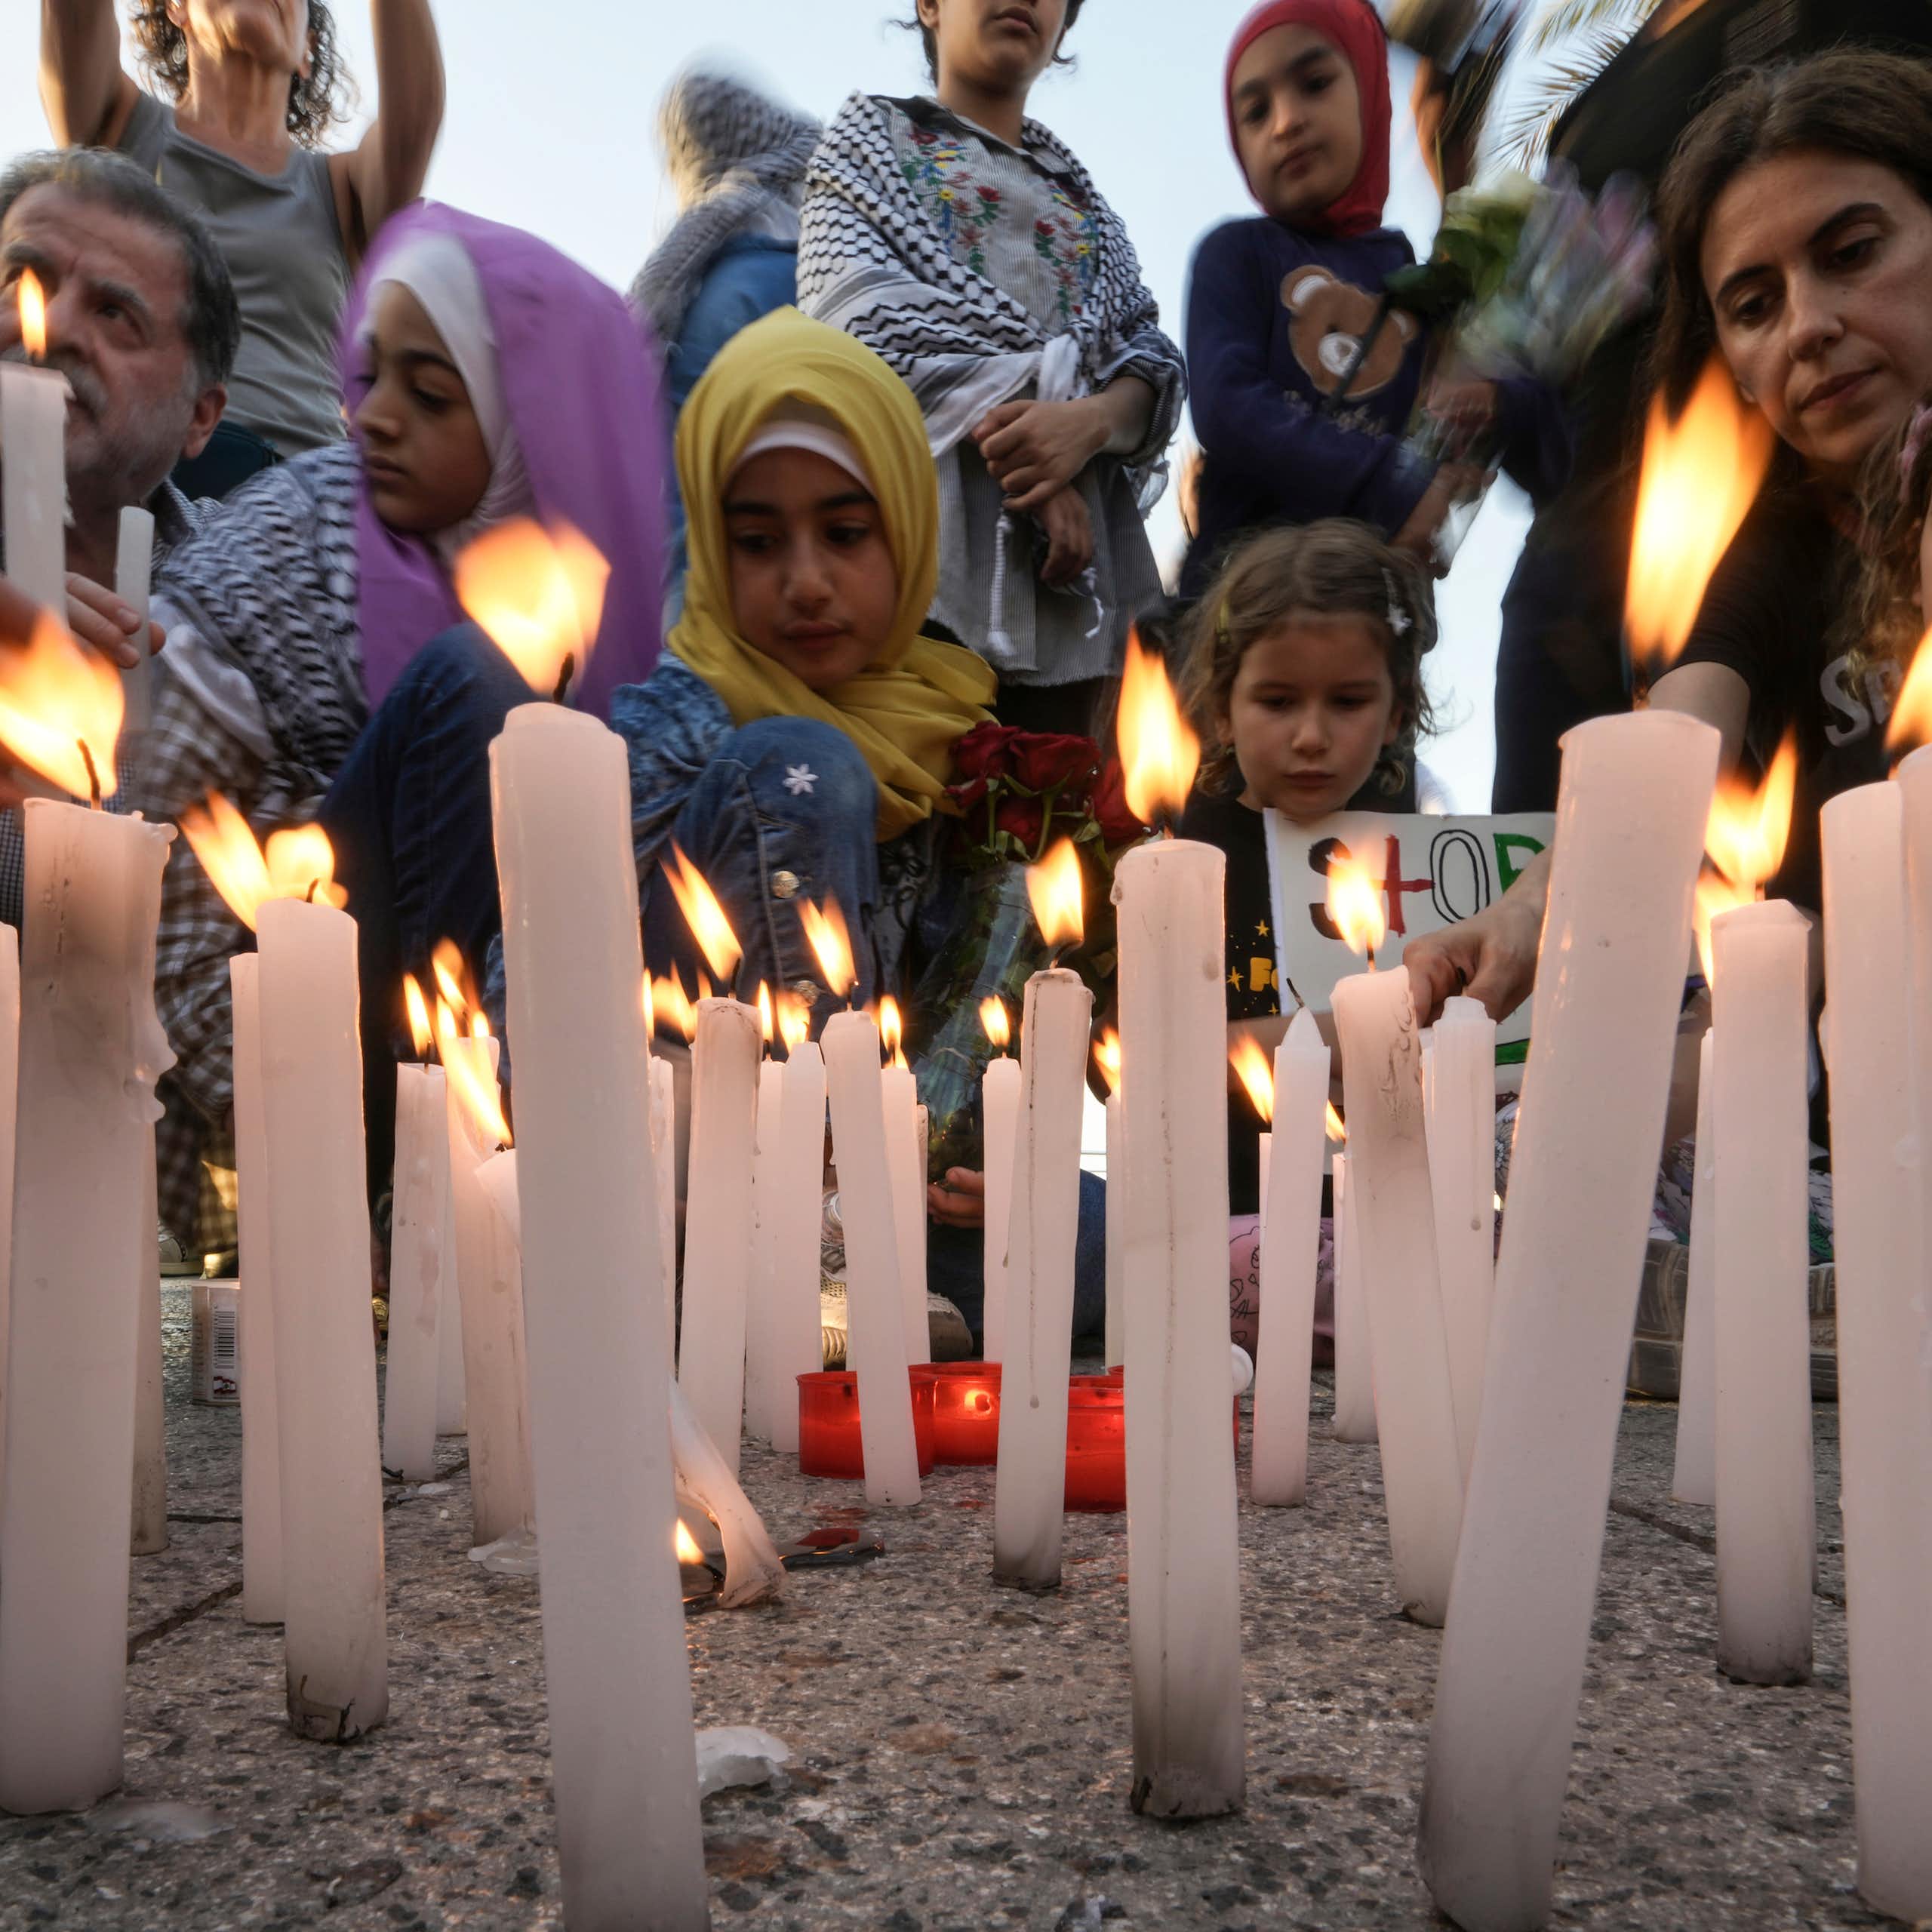 Men, women and children standing in front of lit candles.